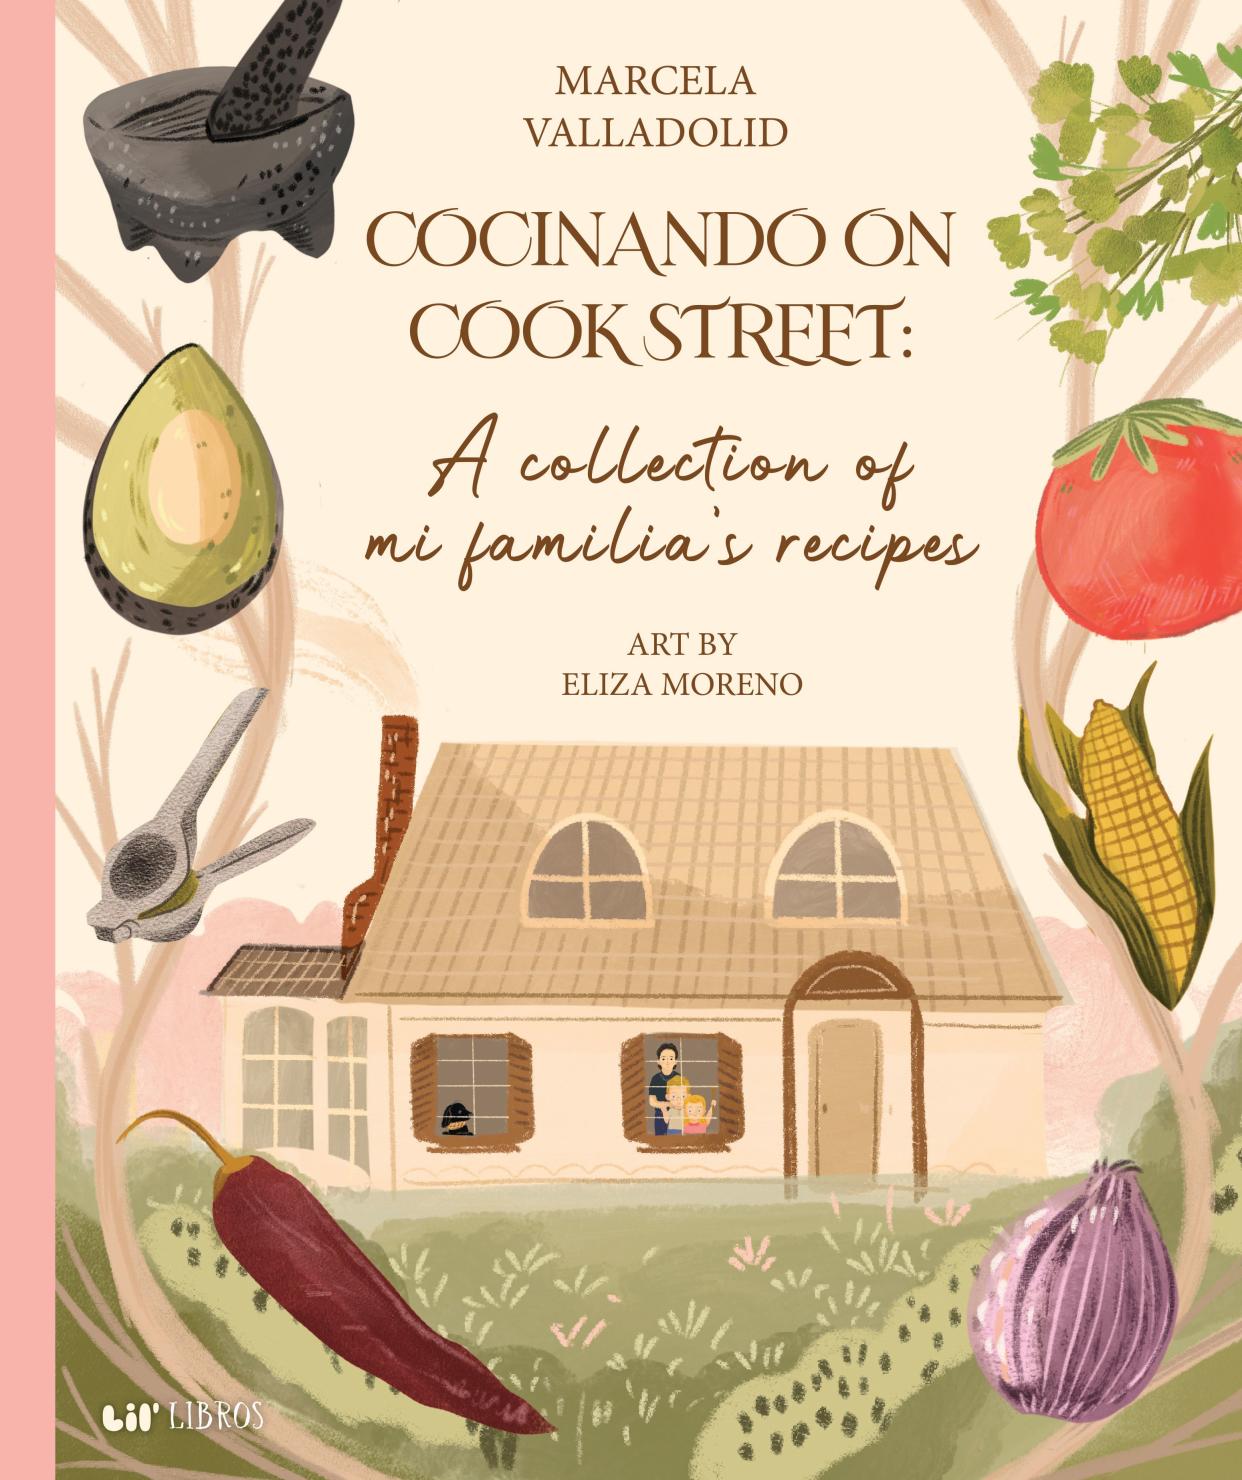 Cocinando on Cook Street: A Collection of Mi Familia's Recipes is Marcela Valladolid's latest cookbook. (Photo: Marcela Valladolid)